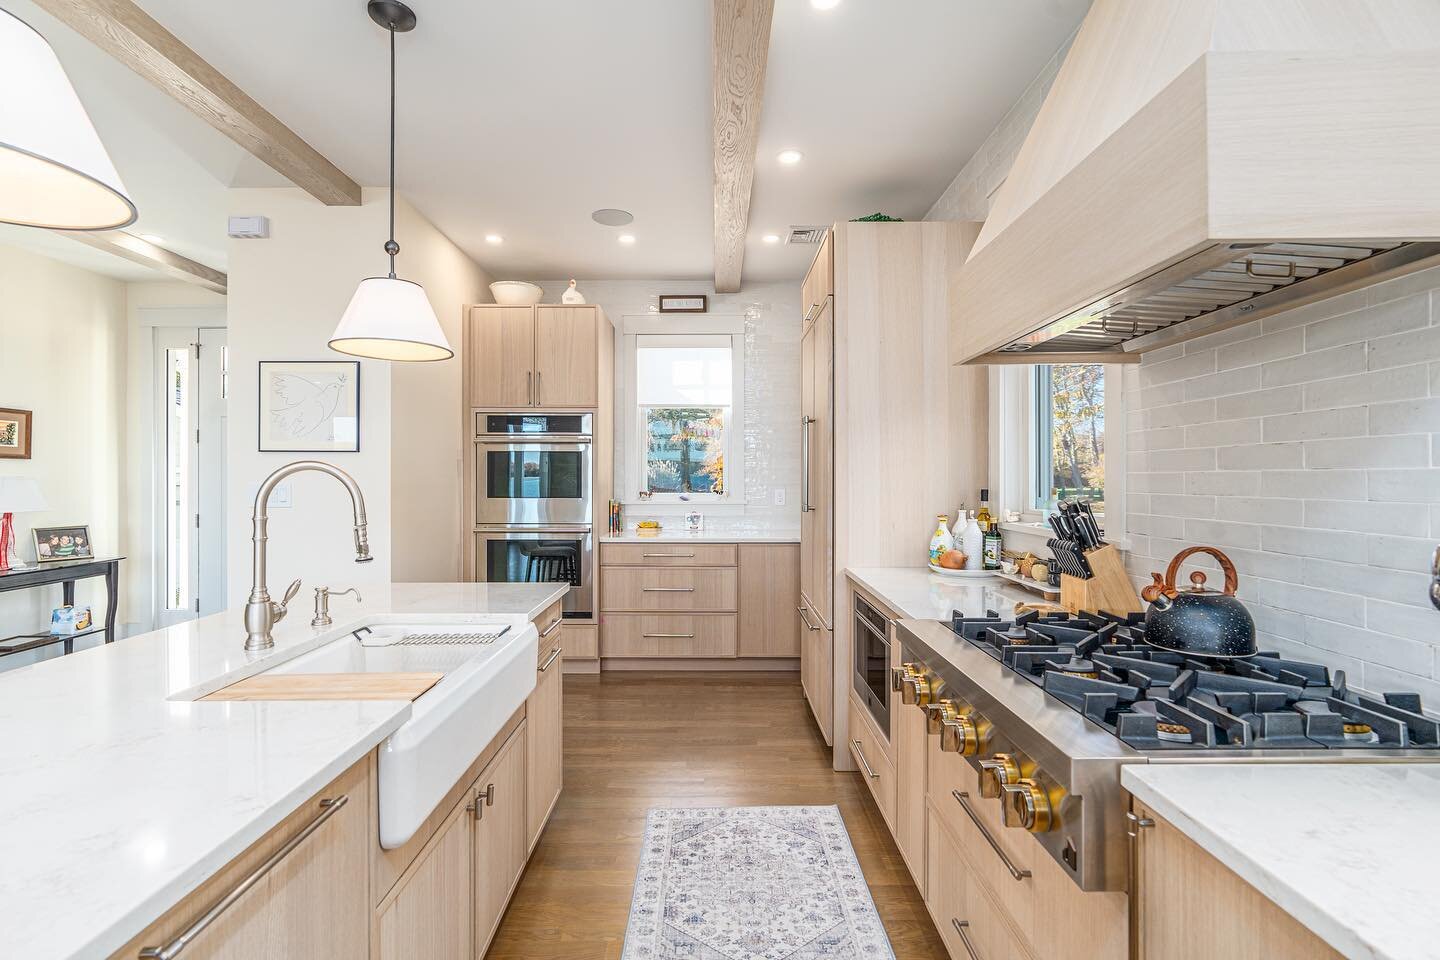 A dream kitchen designed by AMP featuring oak beams and custom cabinetry. 

Located in Southold,NY ✨ 
-
-
-
-
-

#architecture #architecturelovers #northfork #mattituck #southold #greenportvillage #greenportny #modernbarnhouse #modernfarmhouse #moder